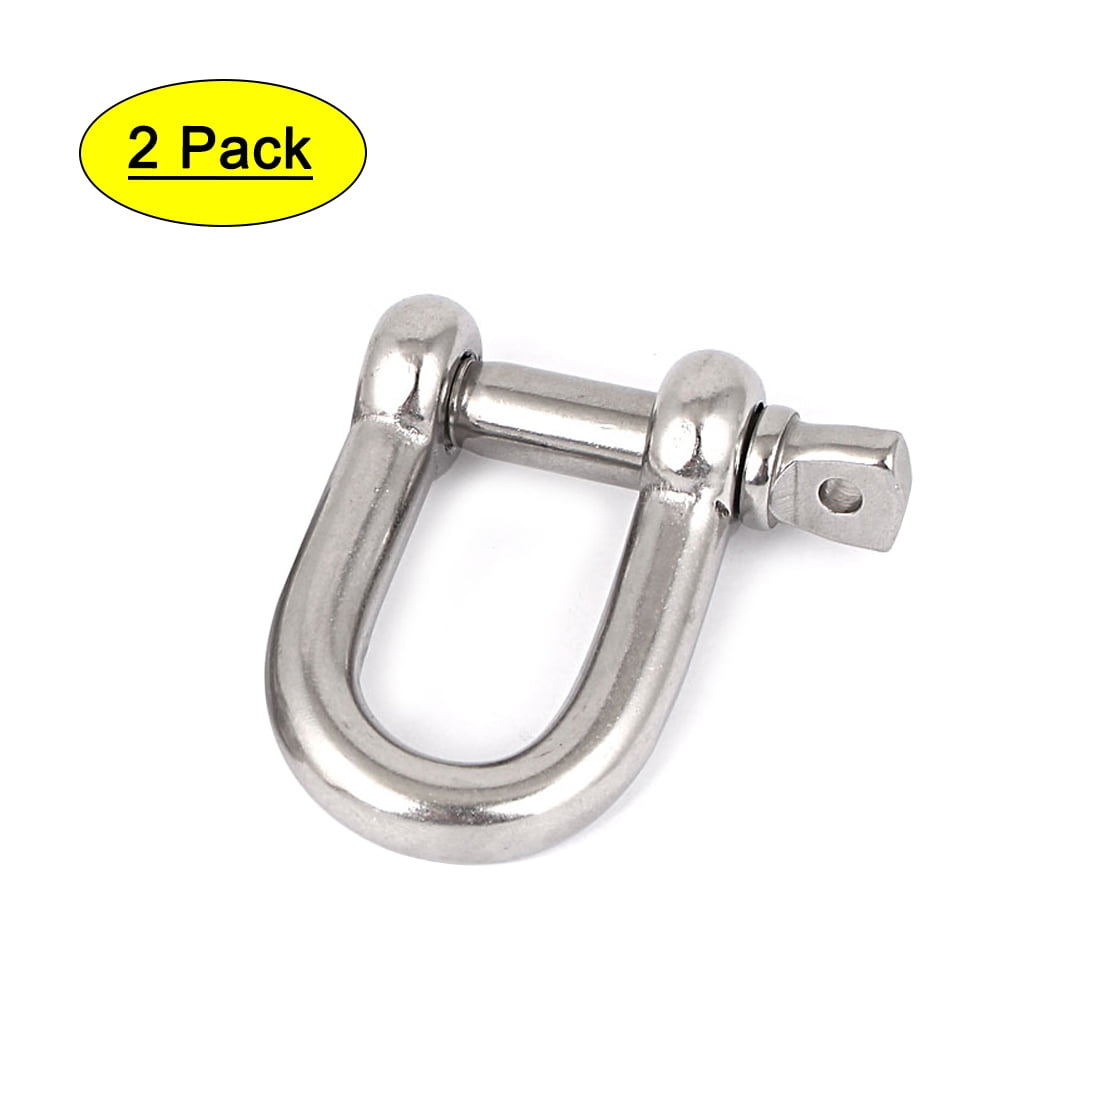 2pcs Strong 35 LBS Magnetic Carabiner Hook Hold Power tools for Cables Grommets 